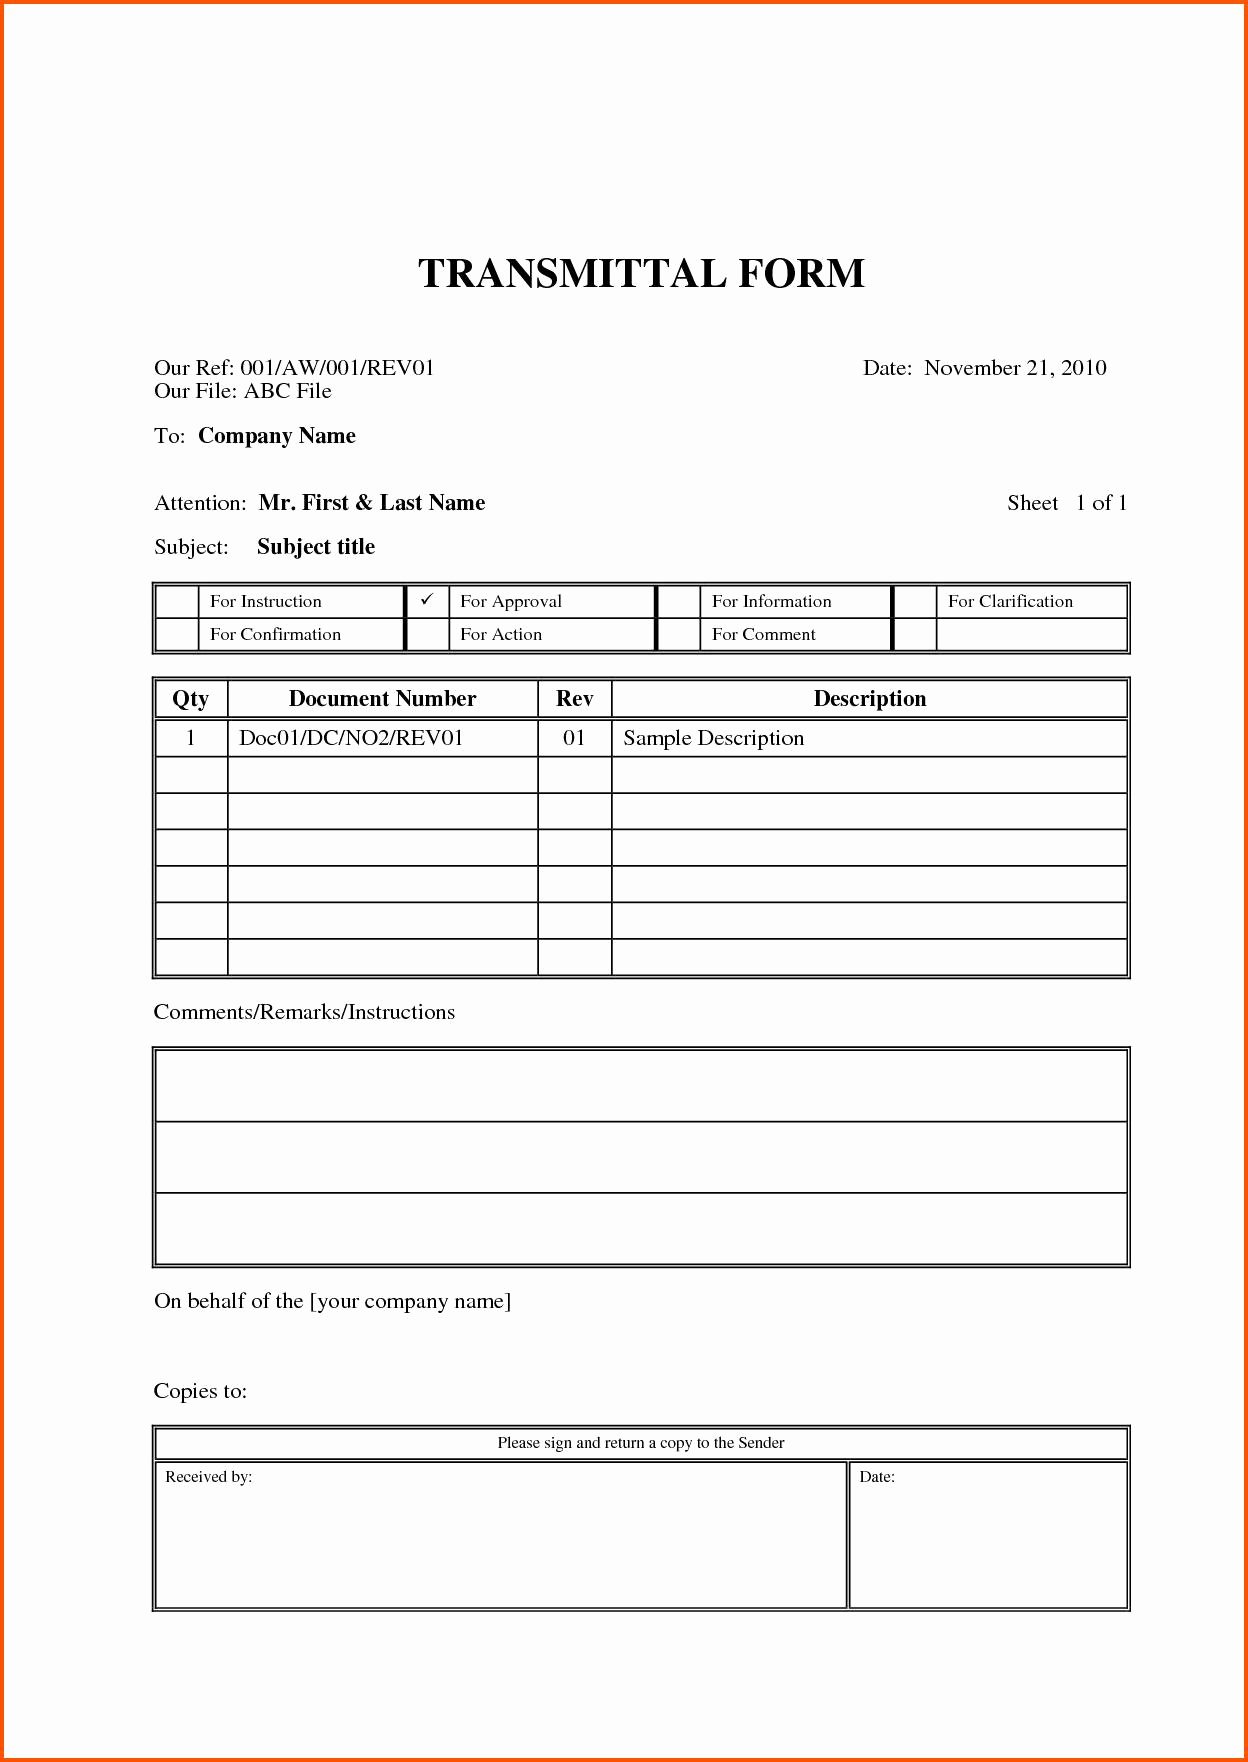 Letter Of Transmittal Template Construction New Free Construction Letter Transmittal Template Samples